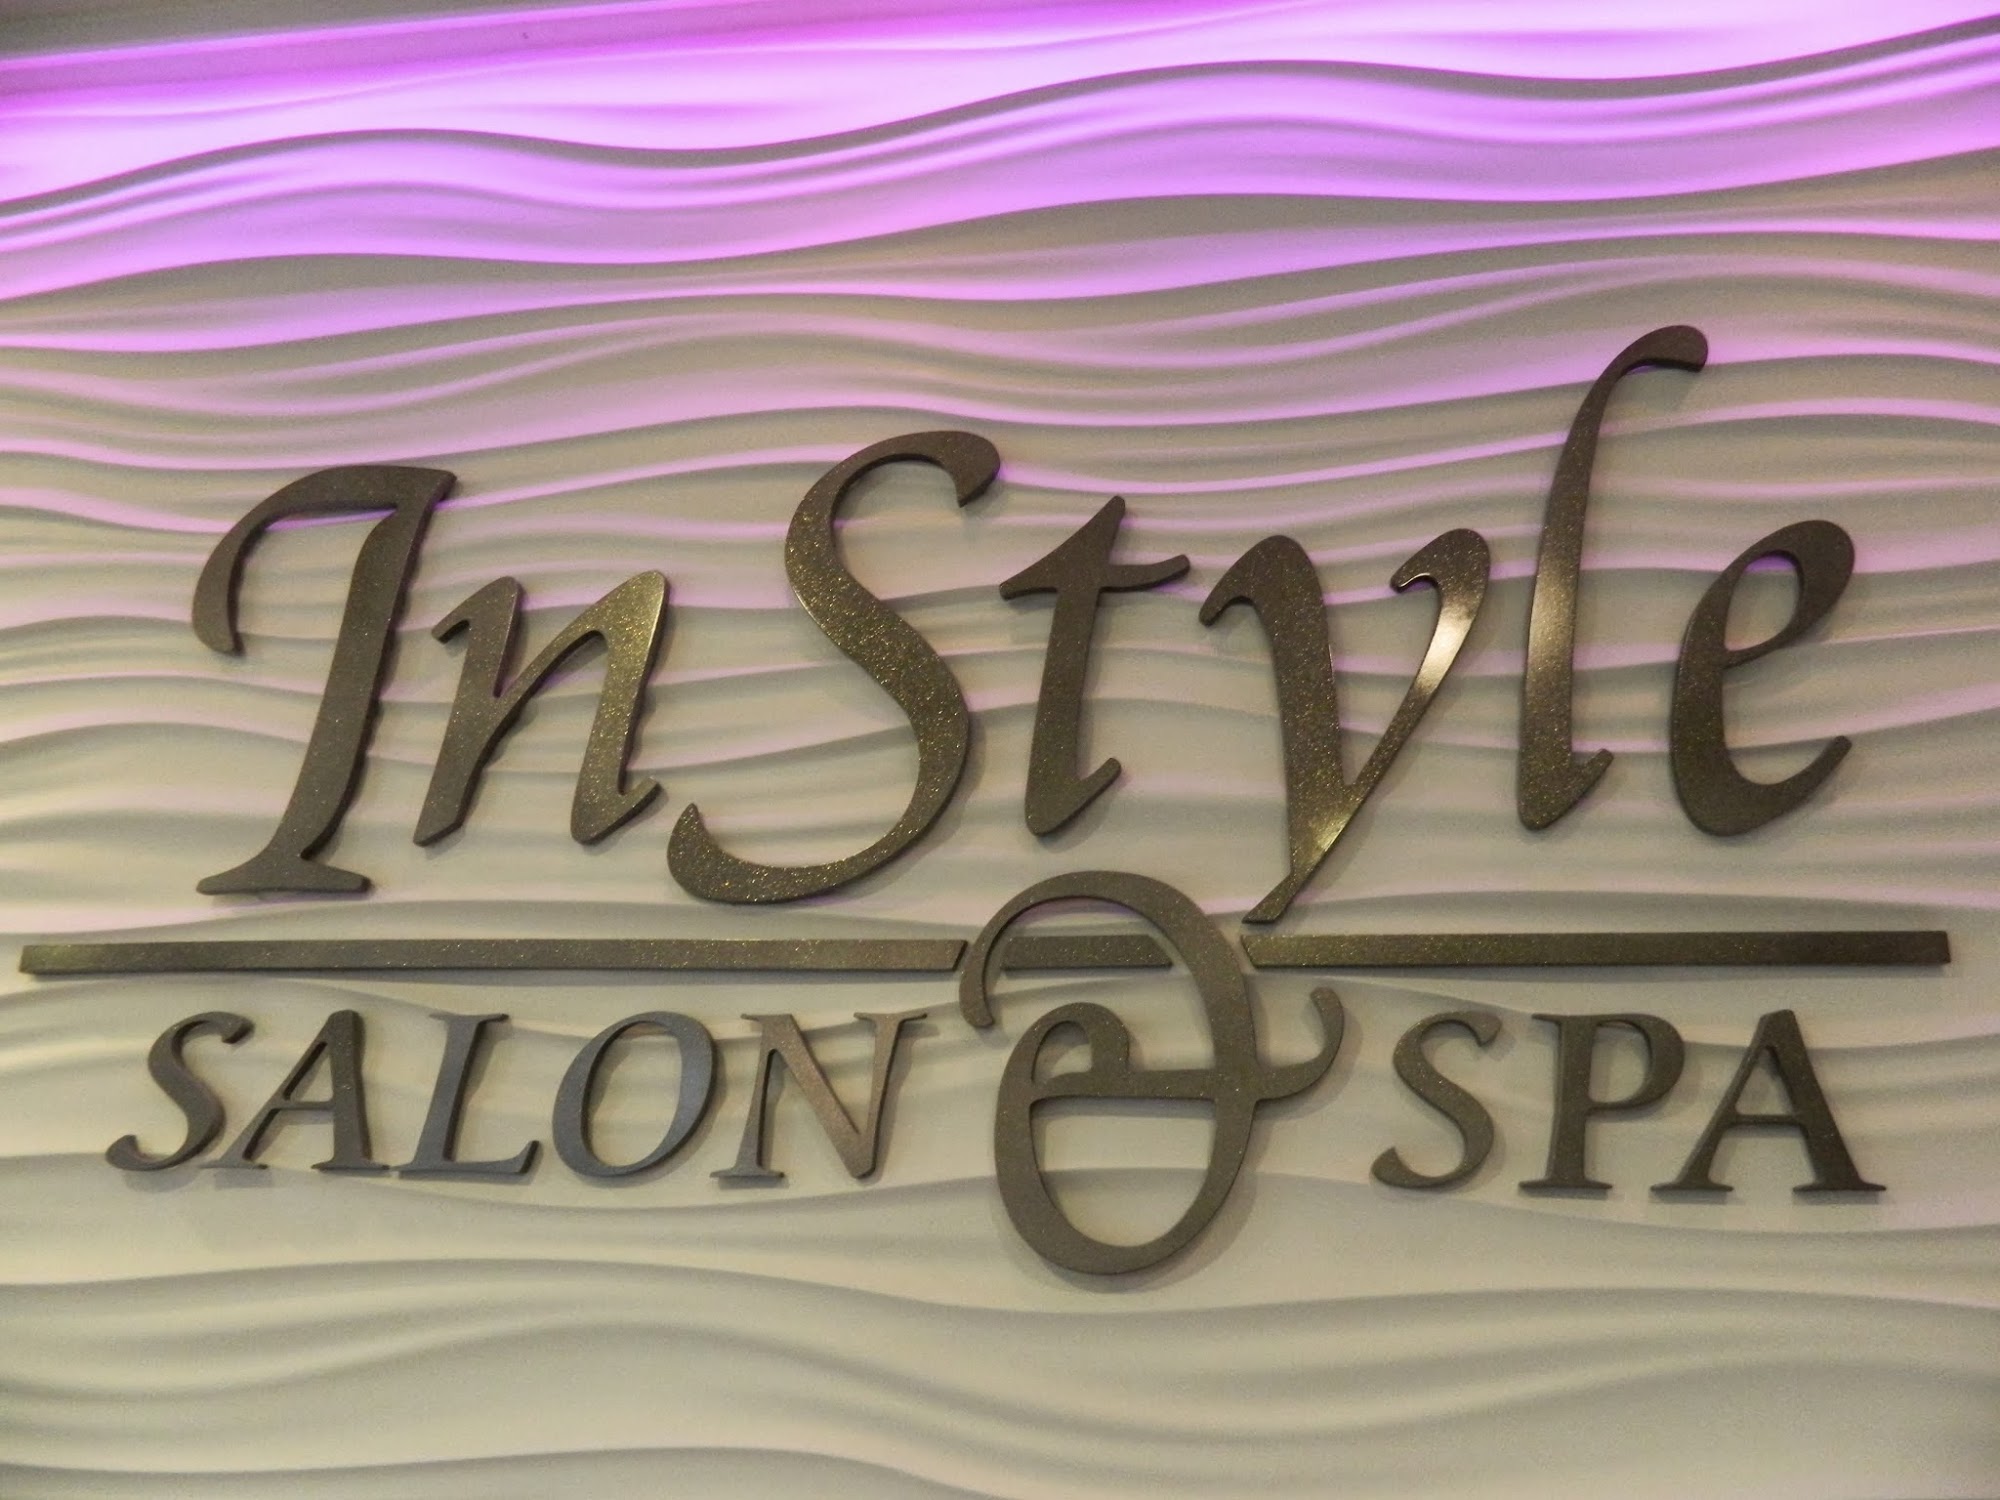 InStyle Salon and Spa